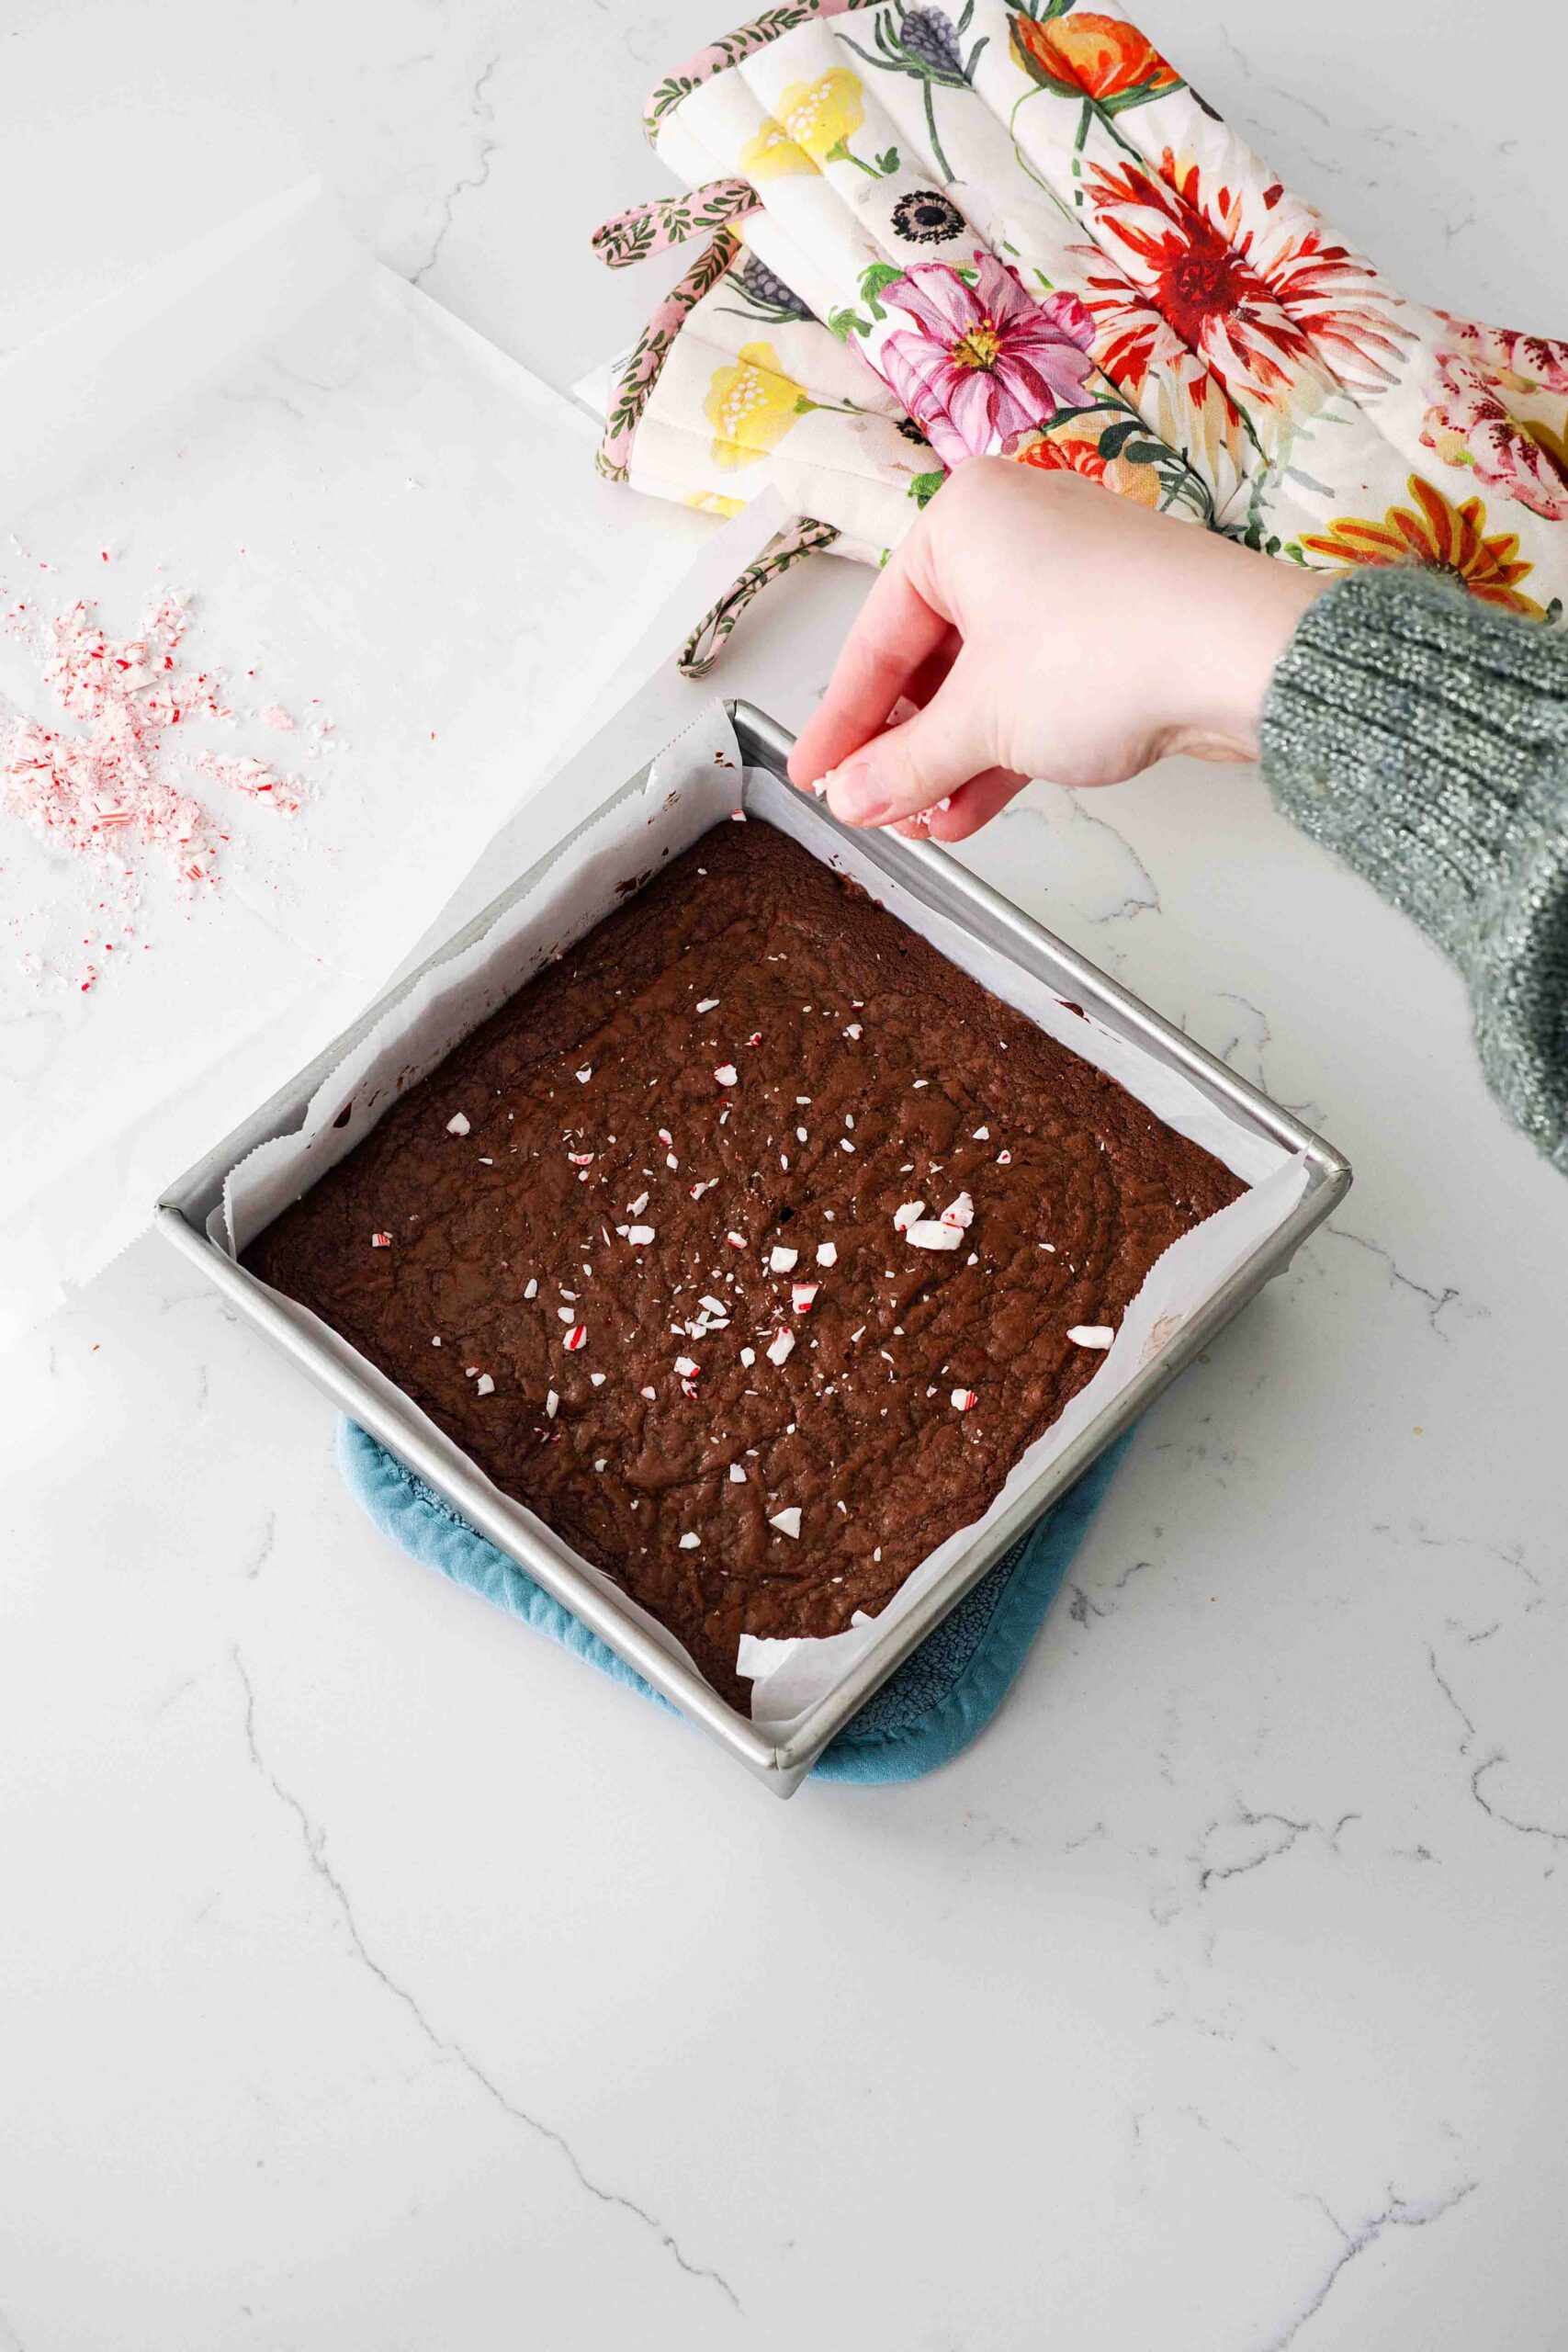 A hand sprinkles crushed candy canes over a hot pan of brownies.